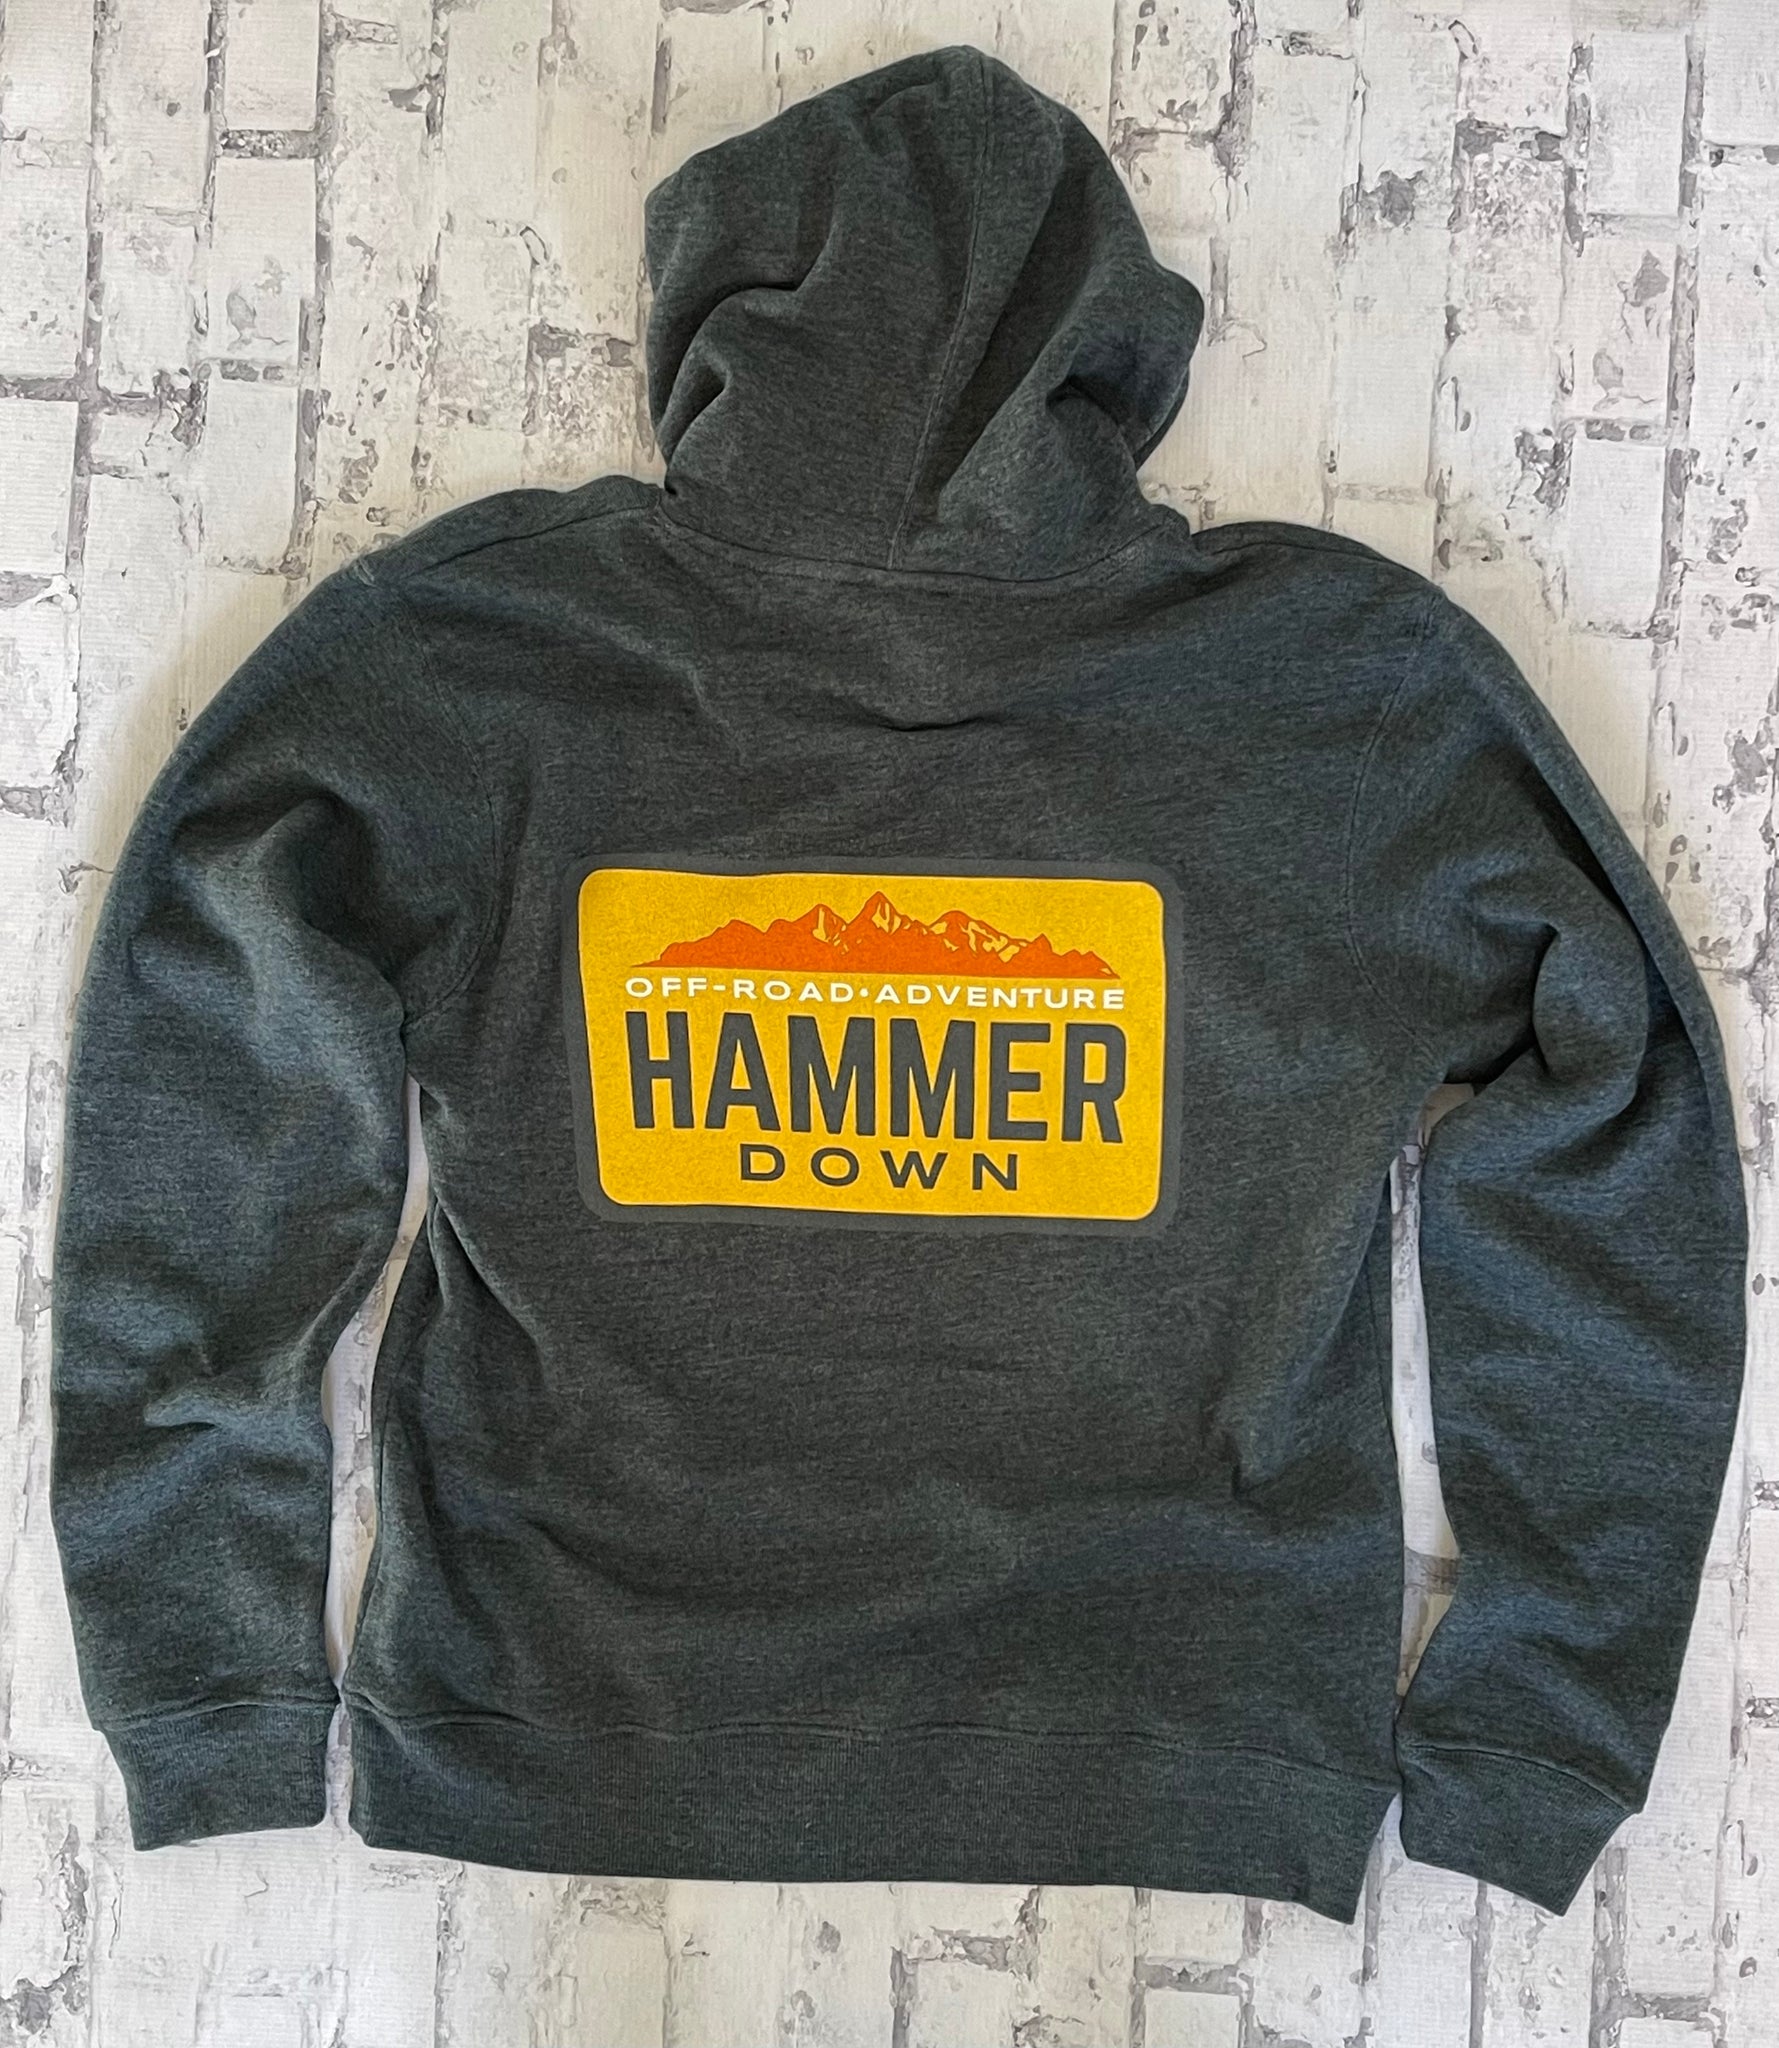 Hammer Down "Off Road Adventure" Hoodie - Heather Charcoal - Southern Charm "Shop The Charm"